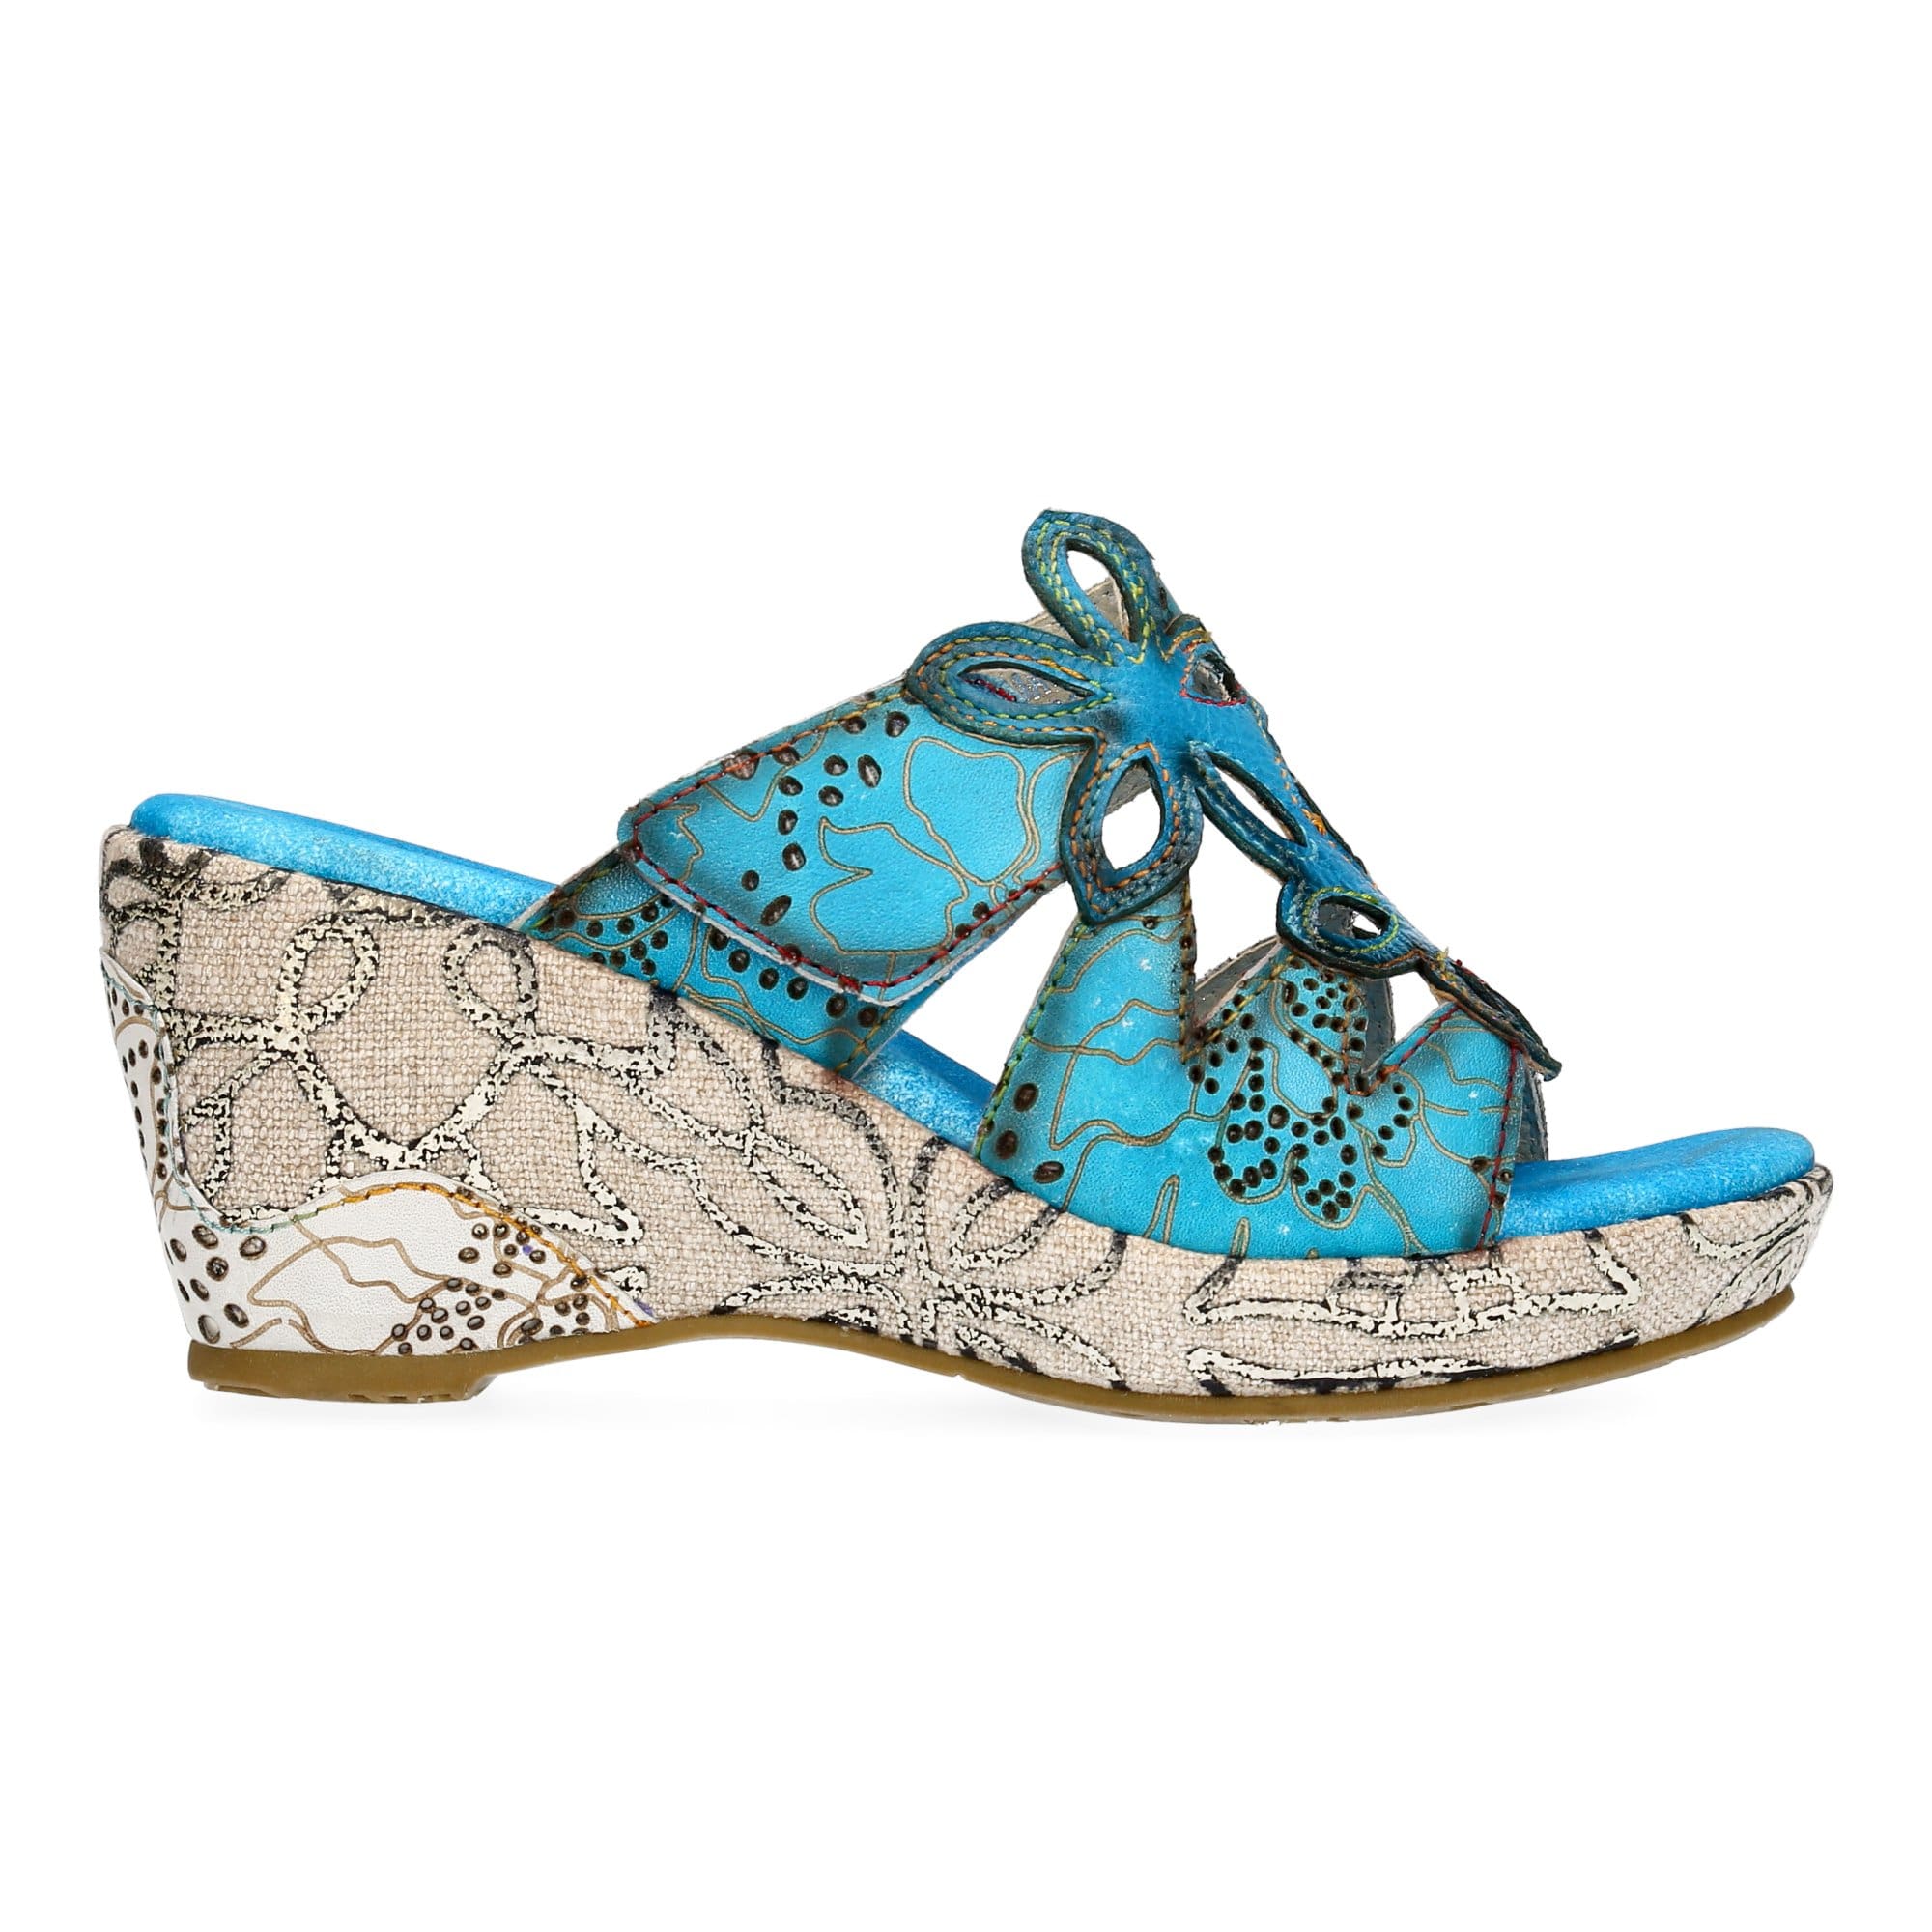 Chaussures BECAUTEO 16 - 35 / Turquoise - Mule